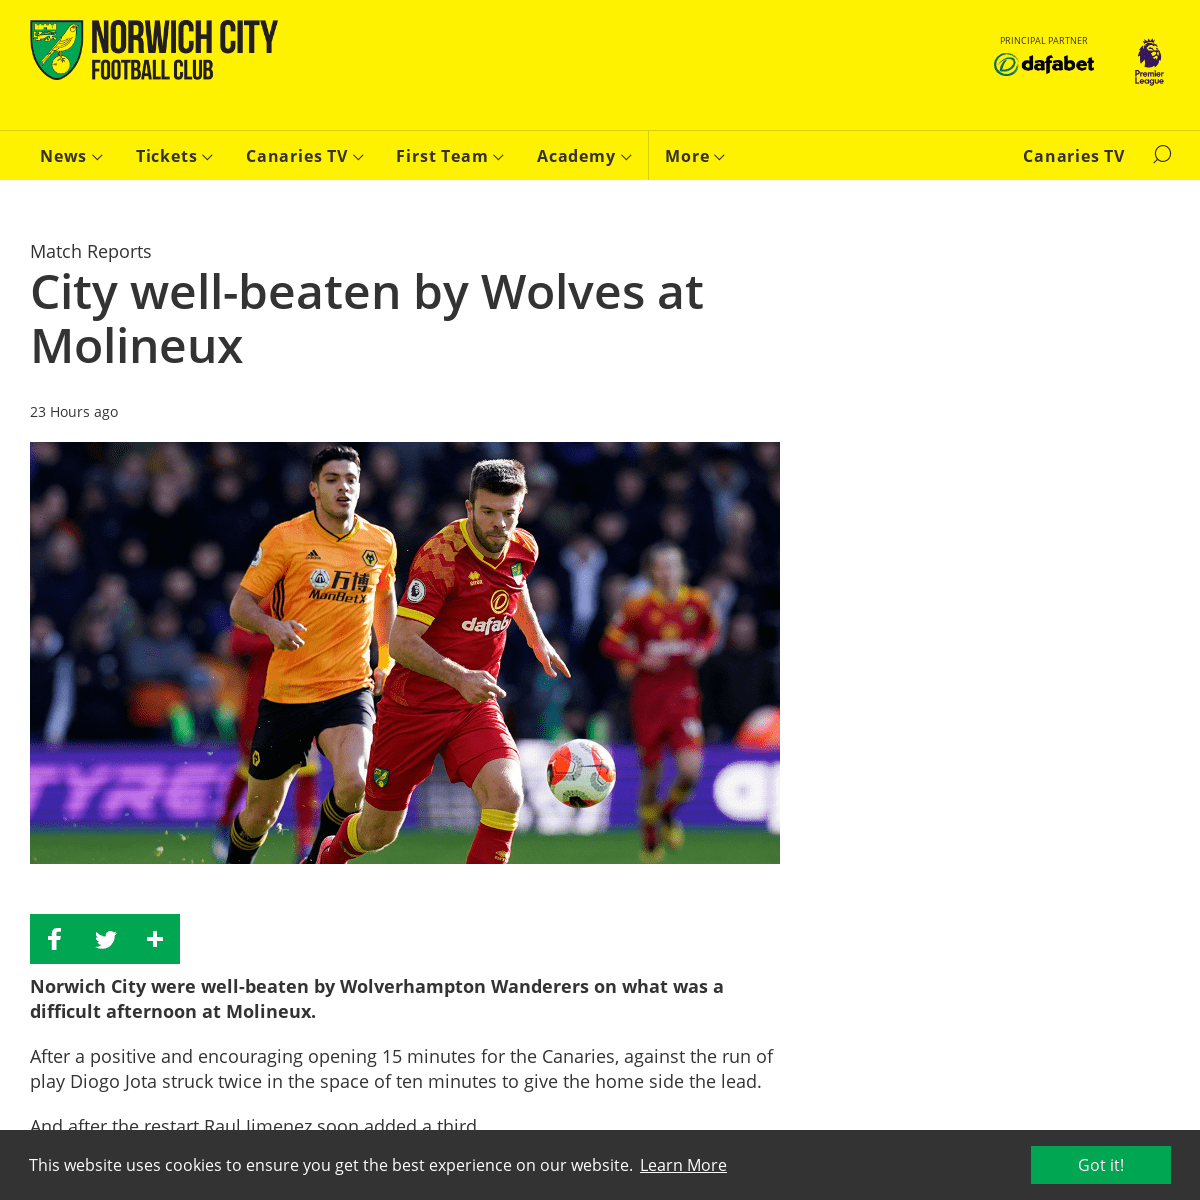 A complete backup of www.canaries.co.uk/News/2020/february/match-report-for-wolverhampton-wanderers-vs-norwich-city-on-23-feb-20